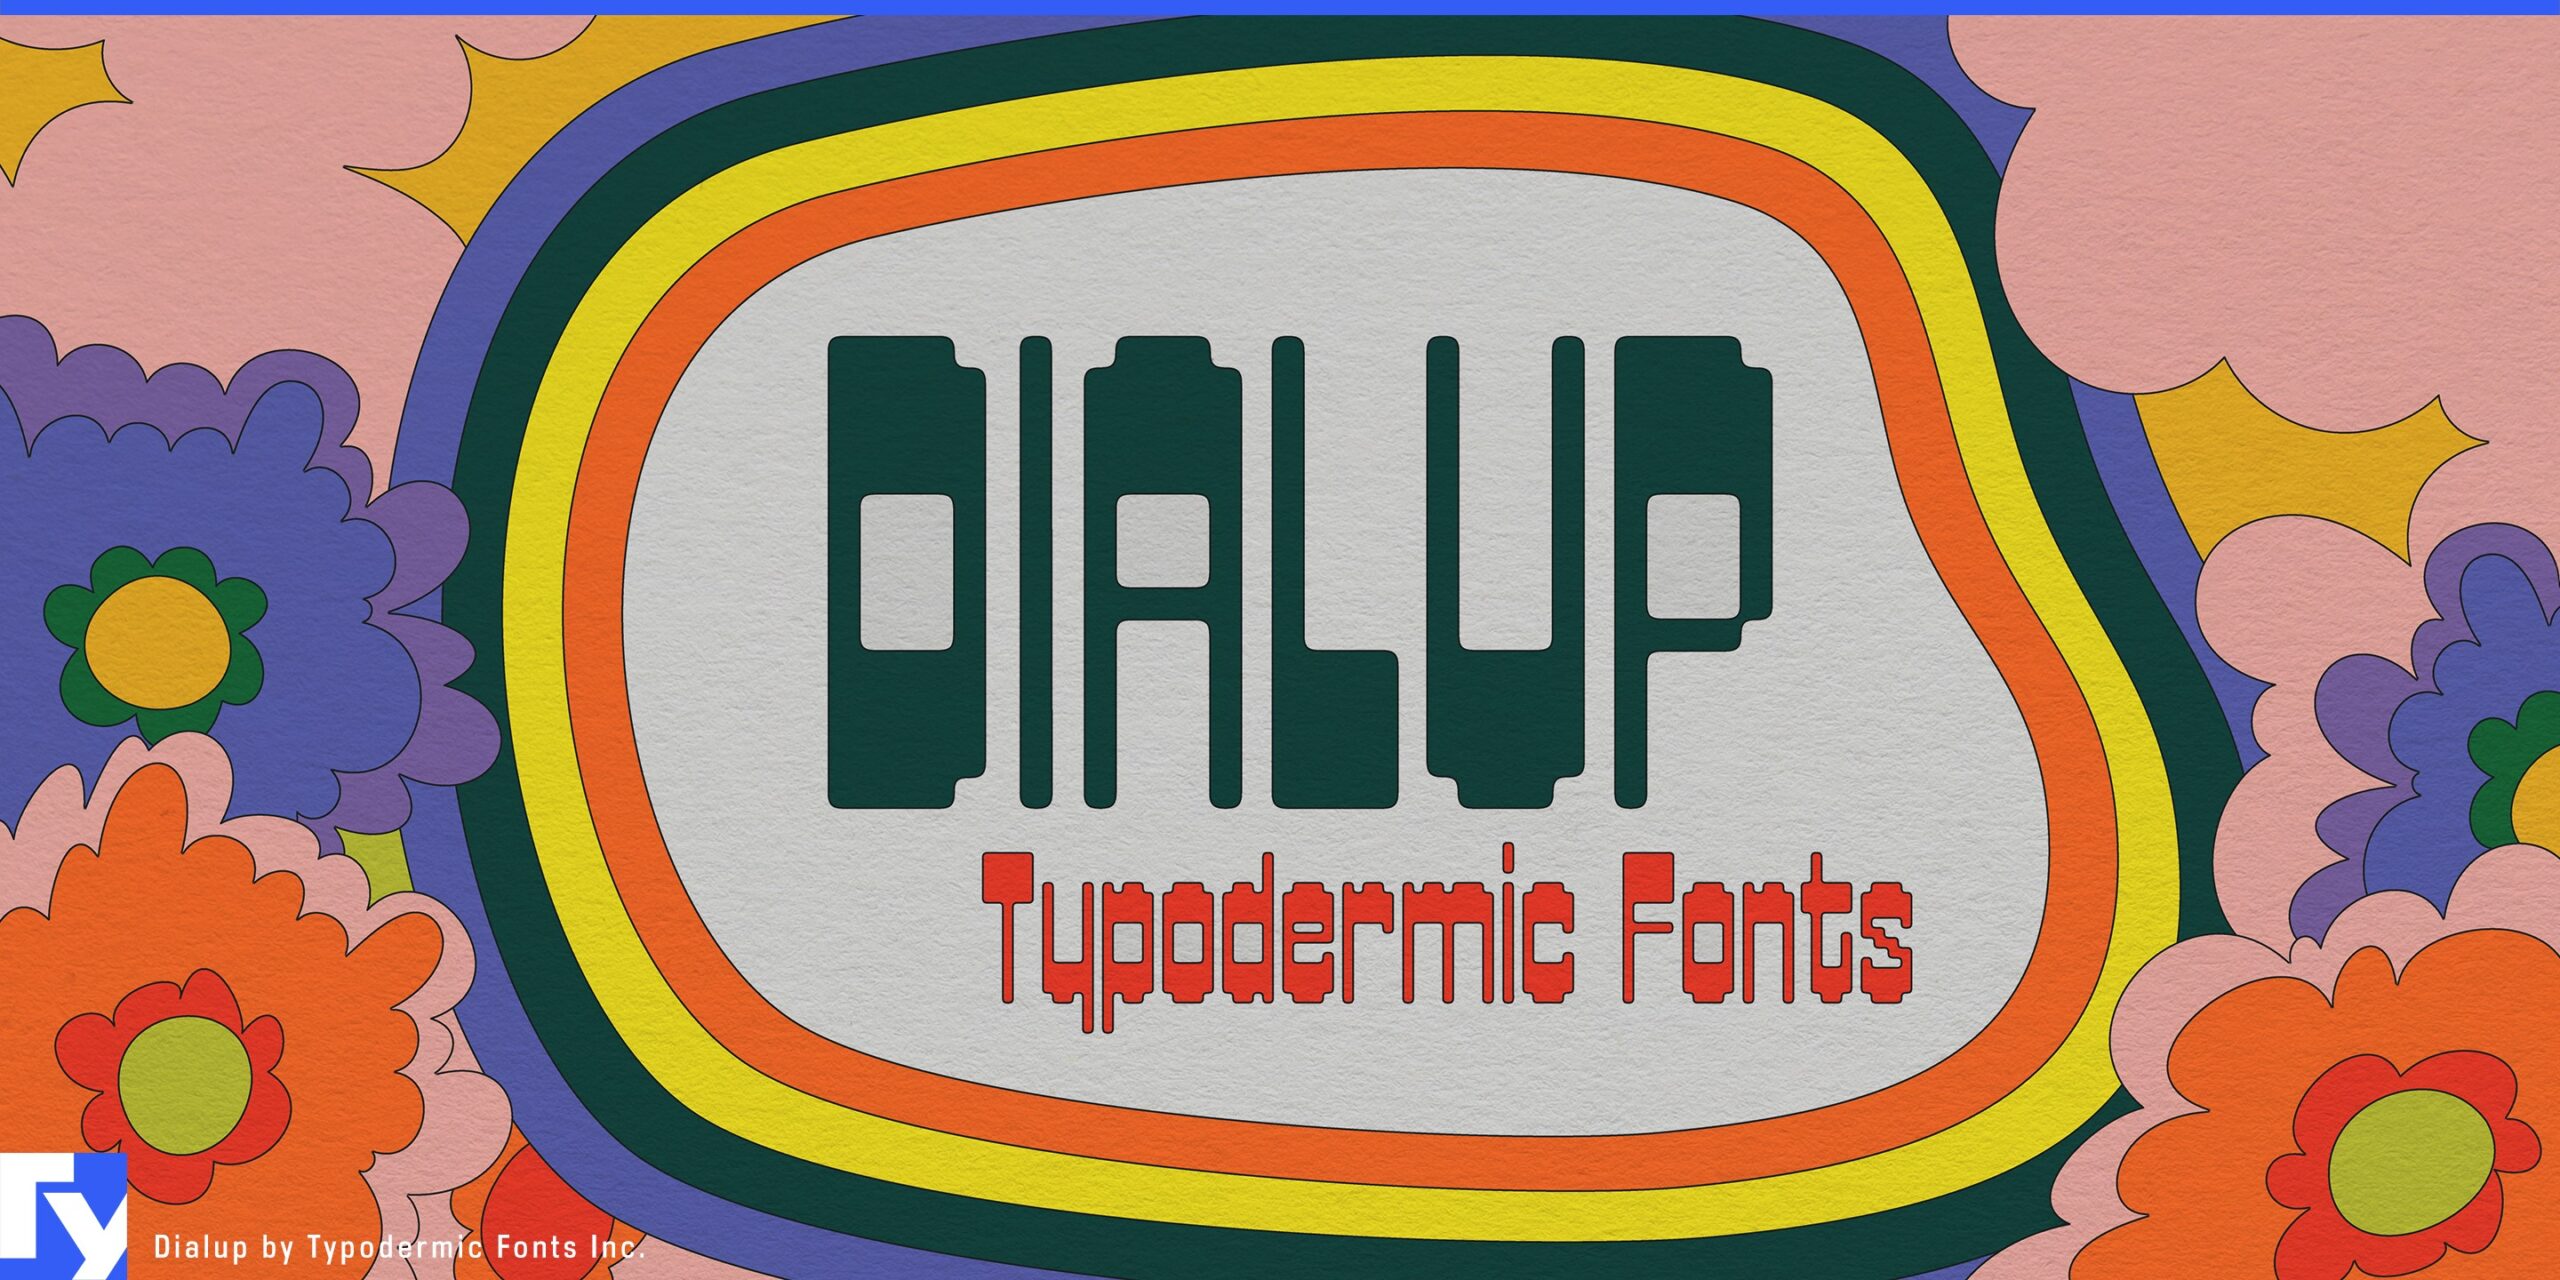 Dialup: A Psychedelic pixel font